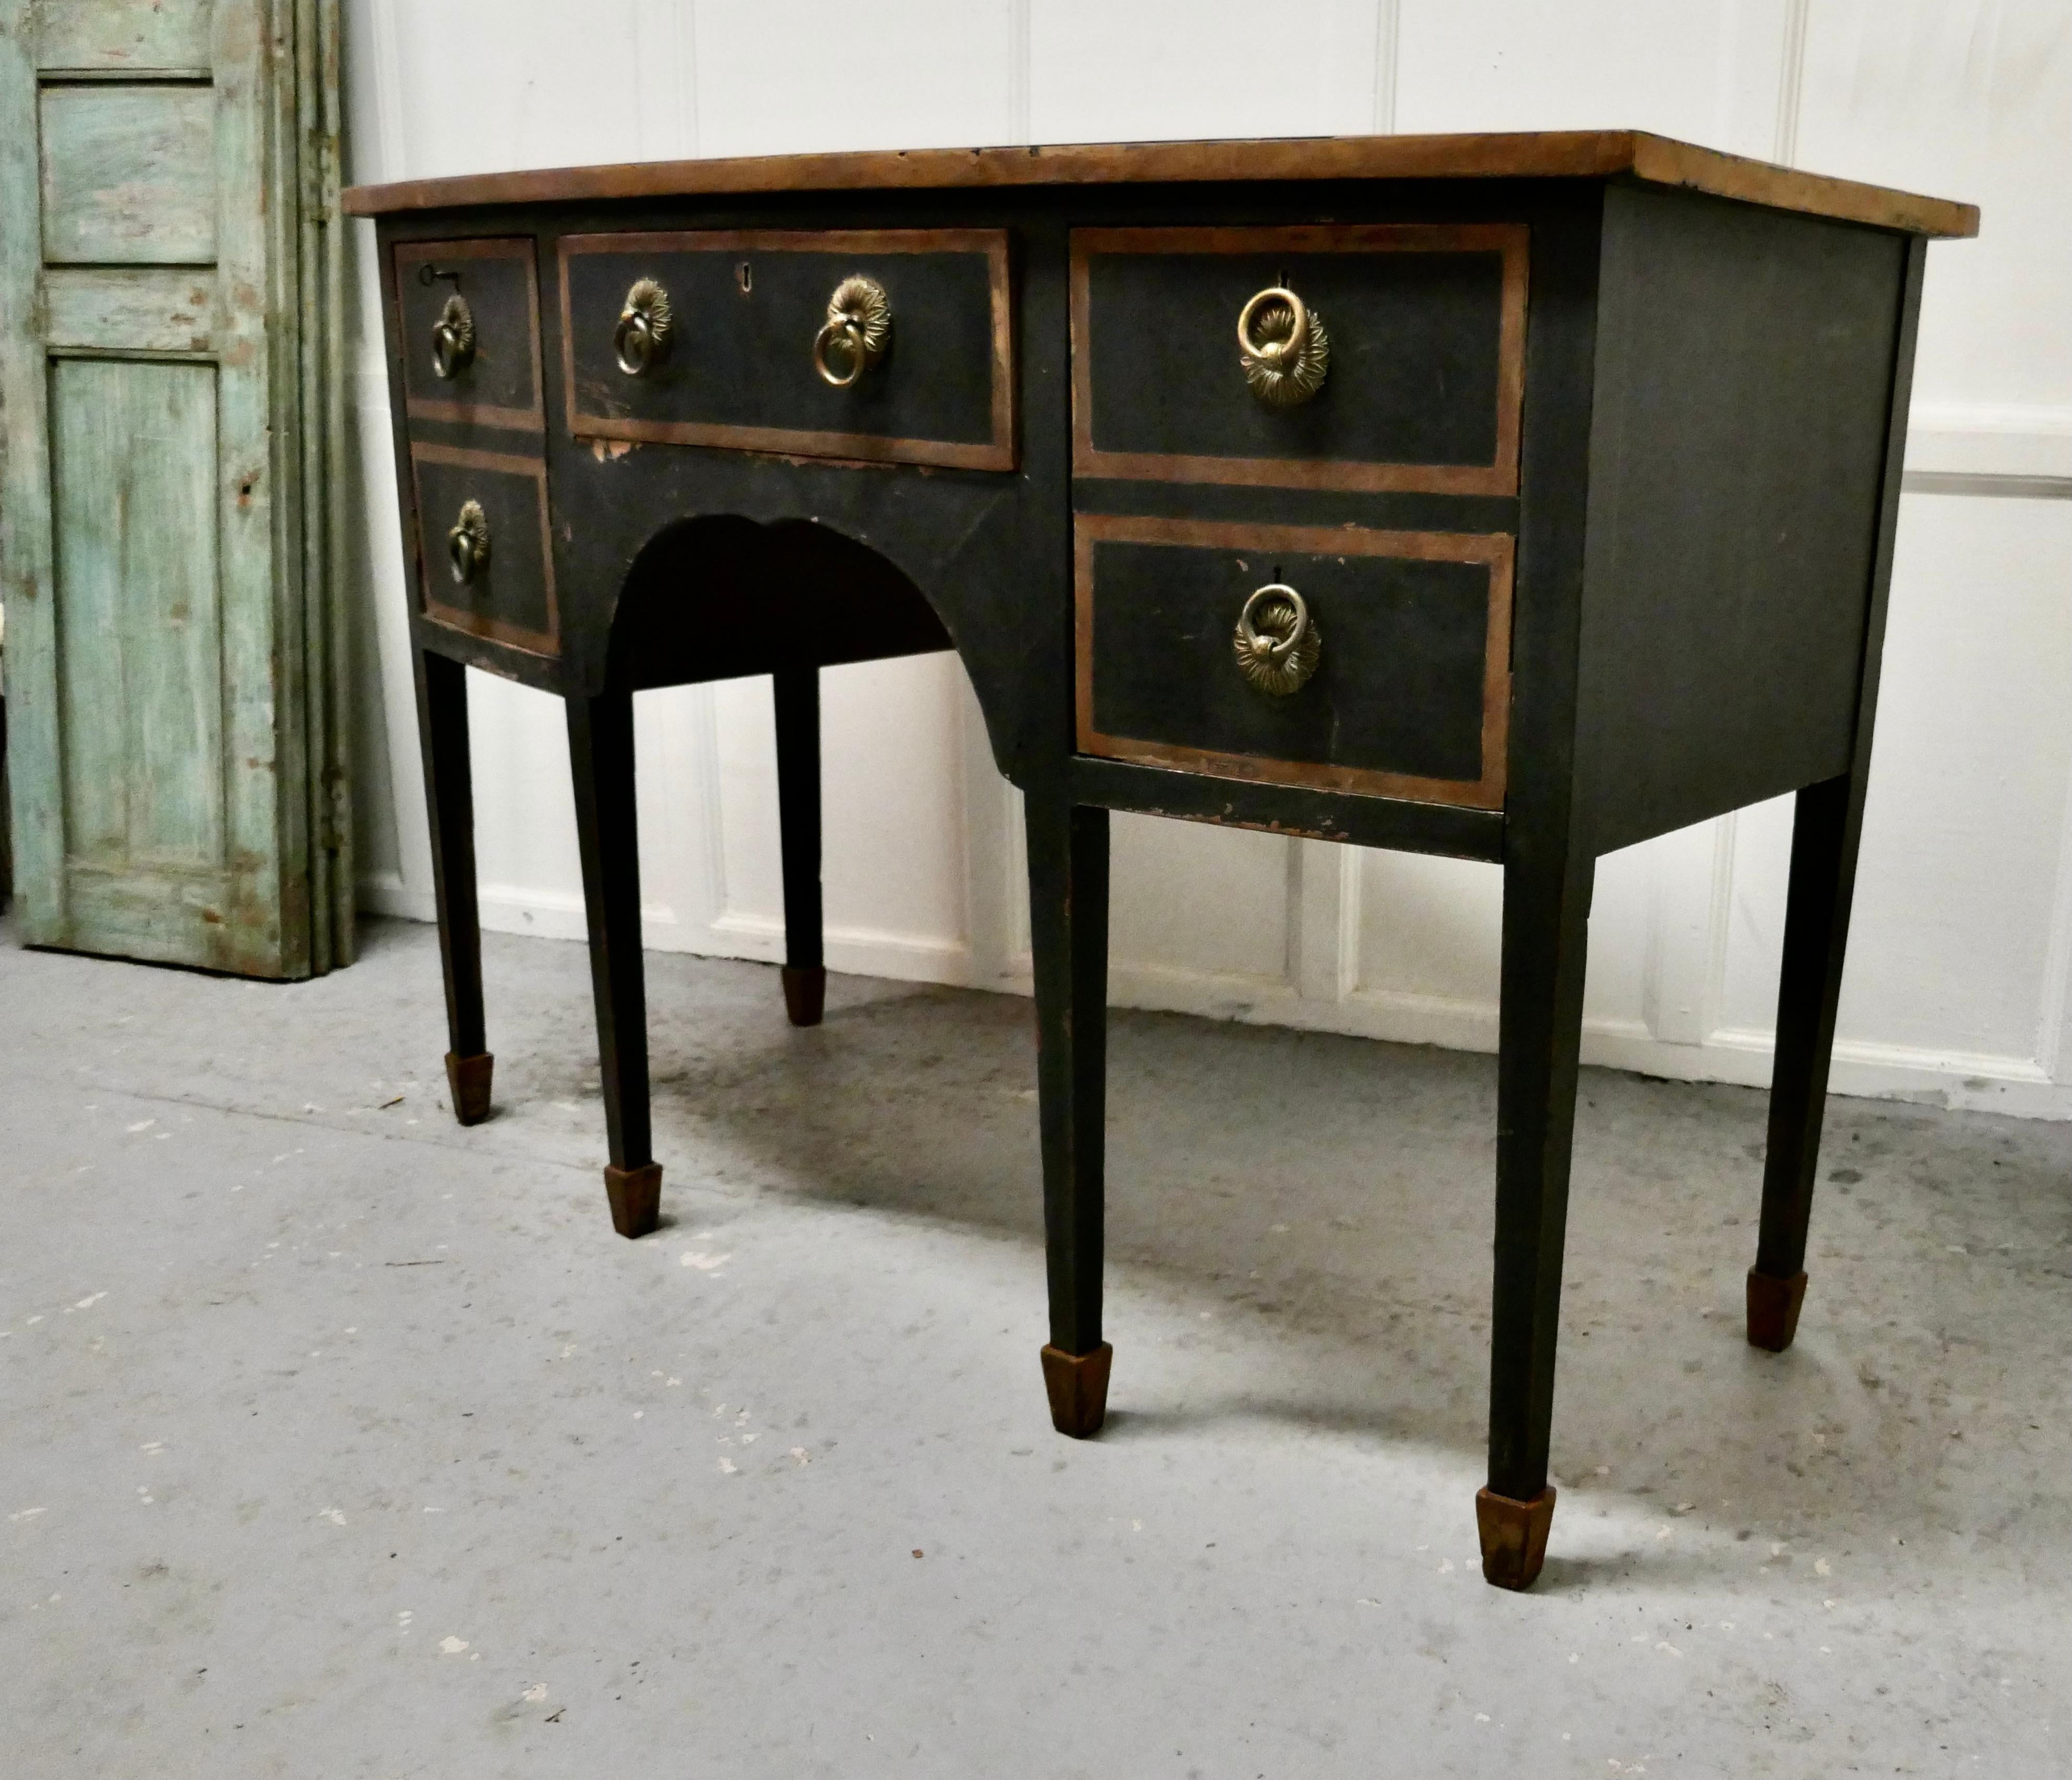 Black and Gold Regency Bow Front Serving Table, with Cellerette In Distressed Condition For Sale In Chillerton, Isle of Wight